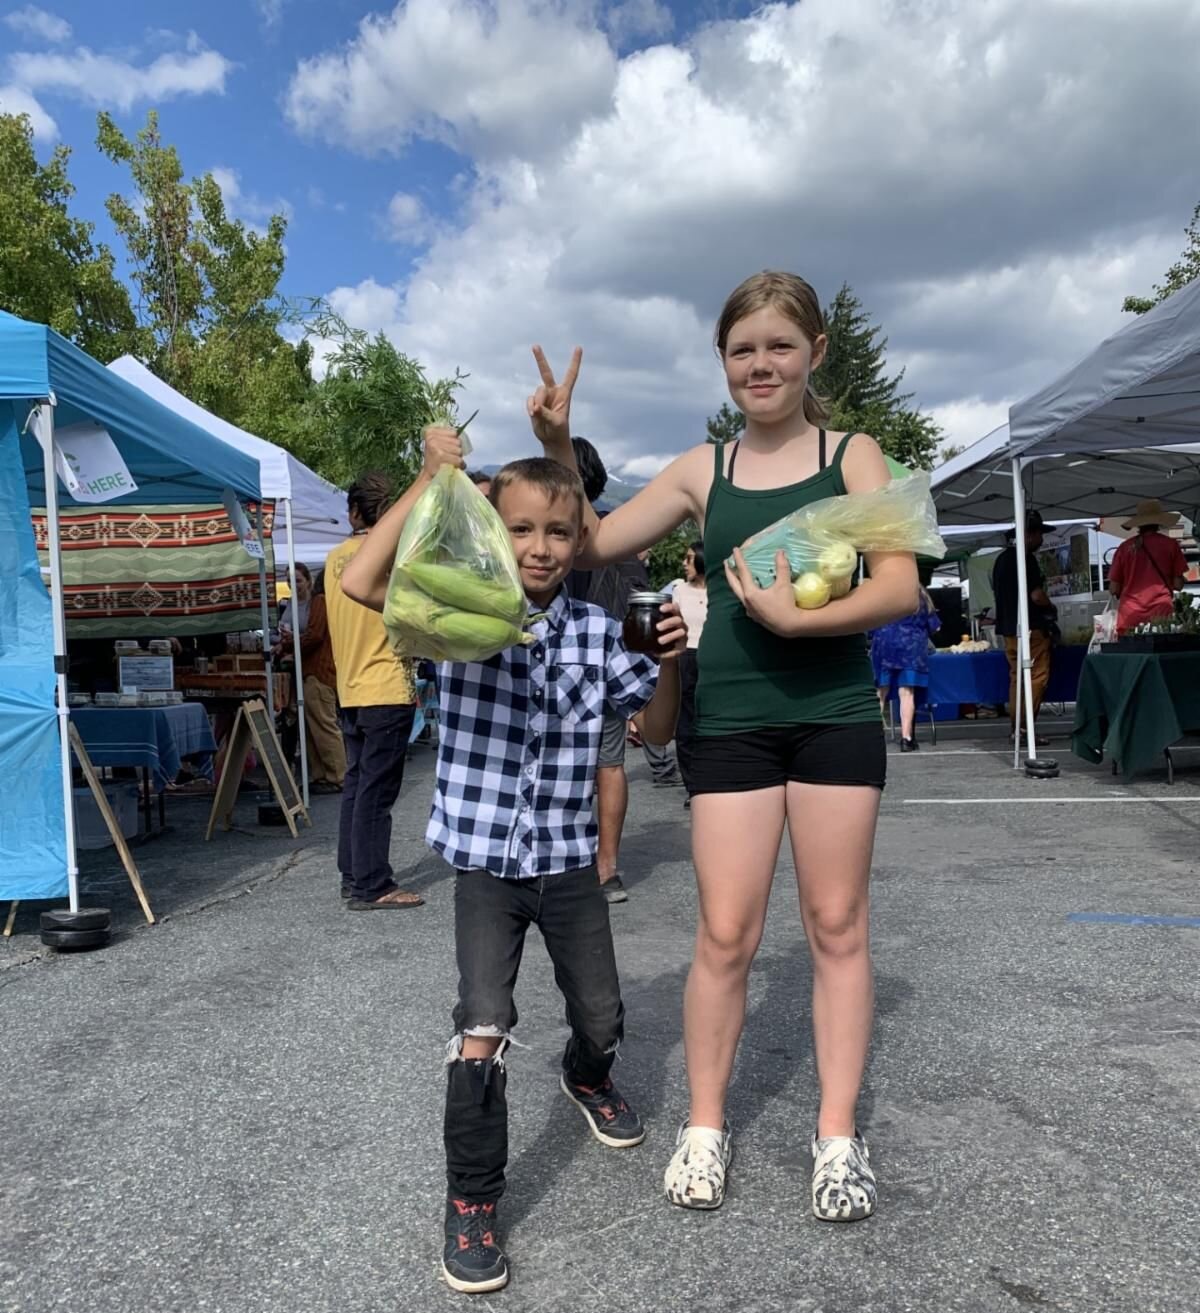 Have you tried School CAFE Coupons?
Young people (age 5-15) will receive a $10 voucher to purchase any produce of their choice when they shop at the market. More vouchers are available - kids can get another one, even if they already got one this sea